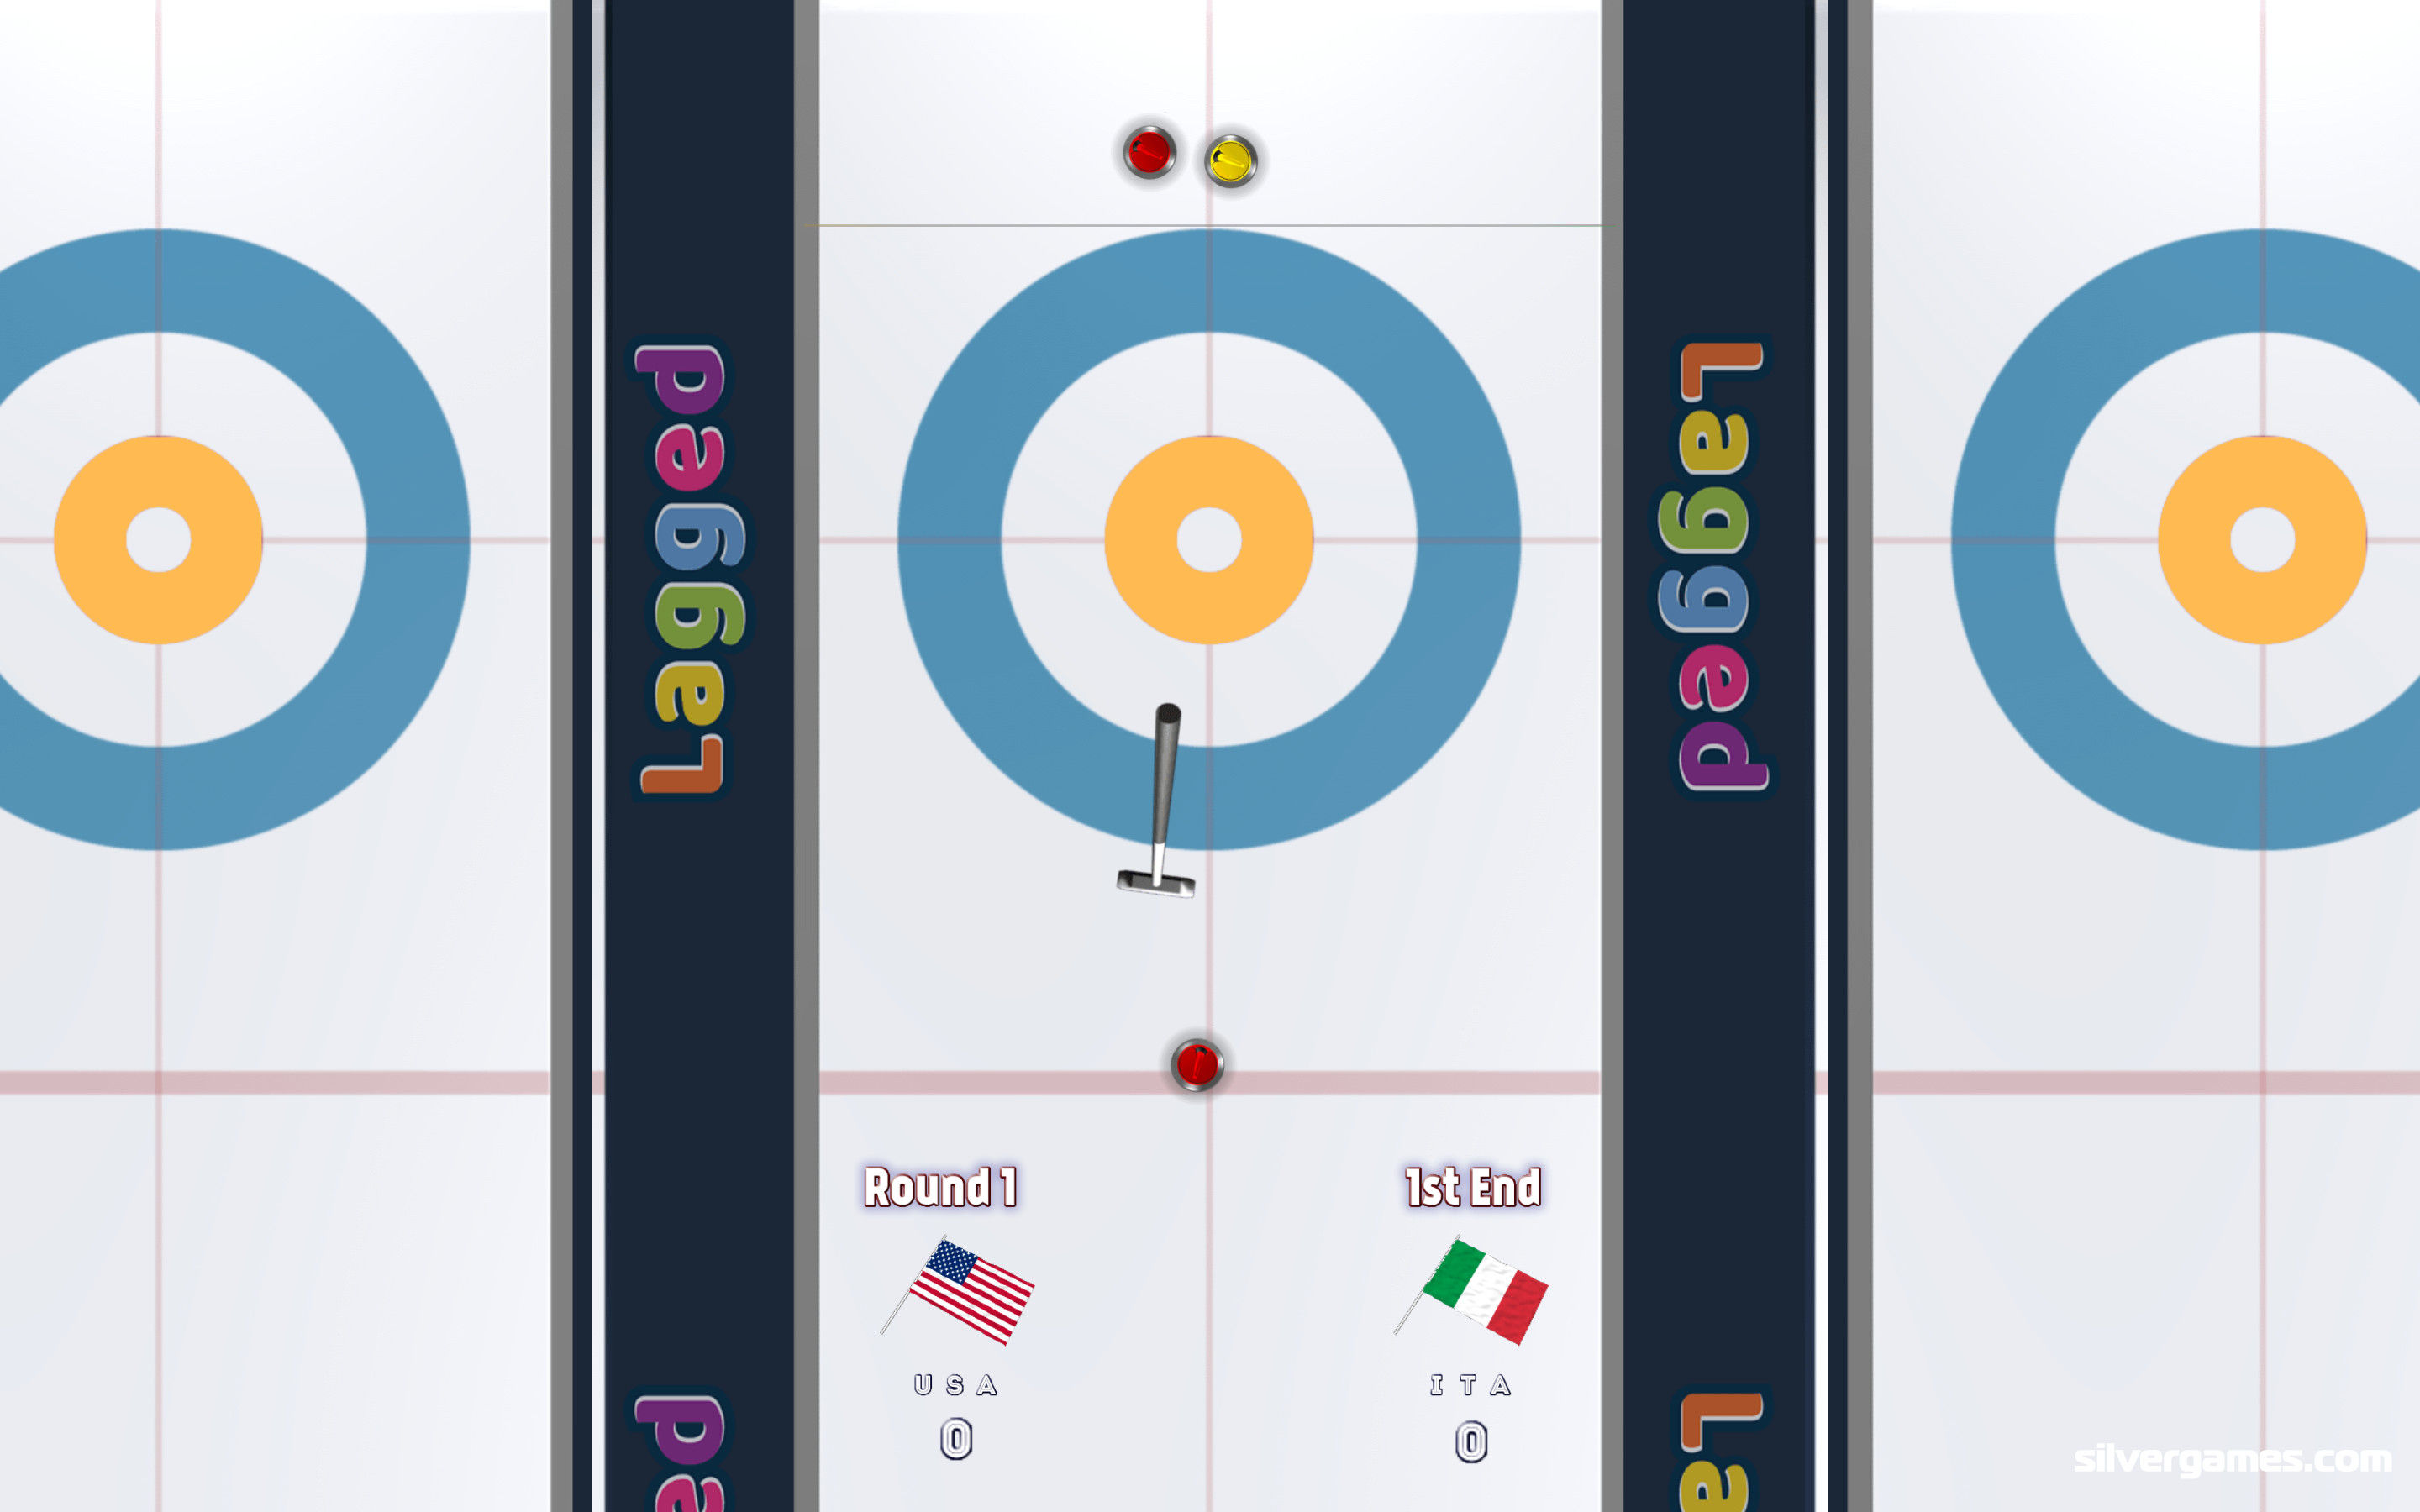 Curling World Cup